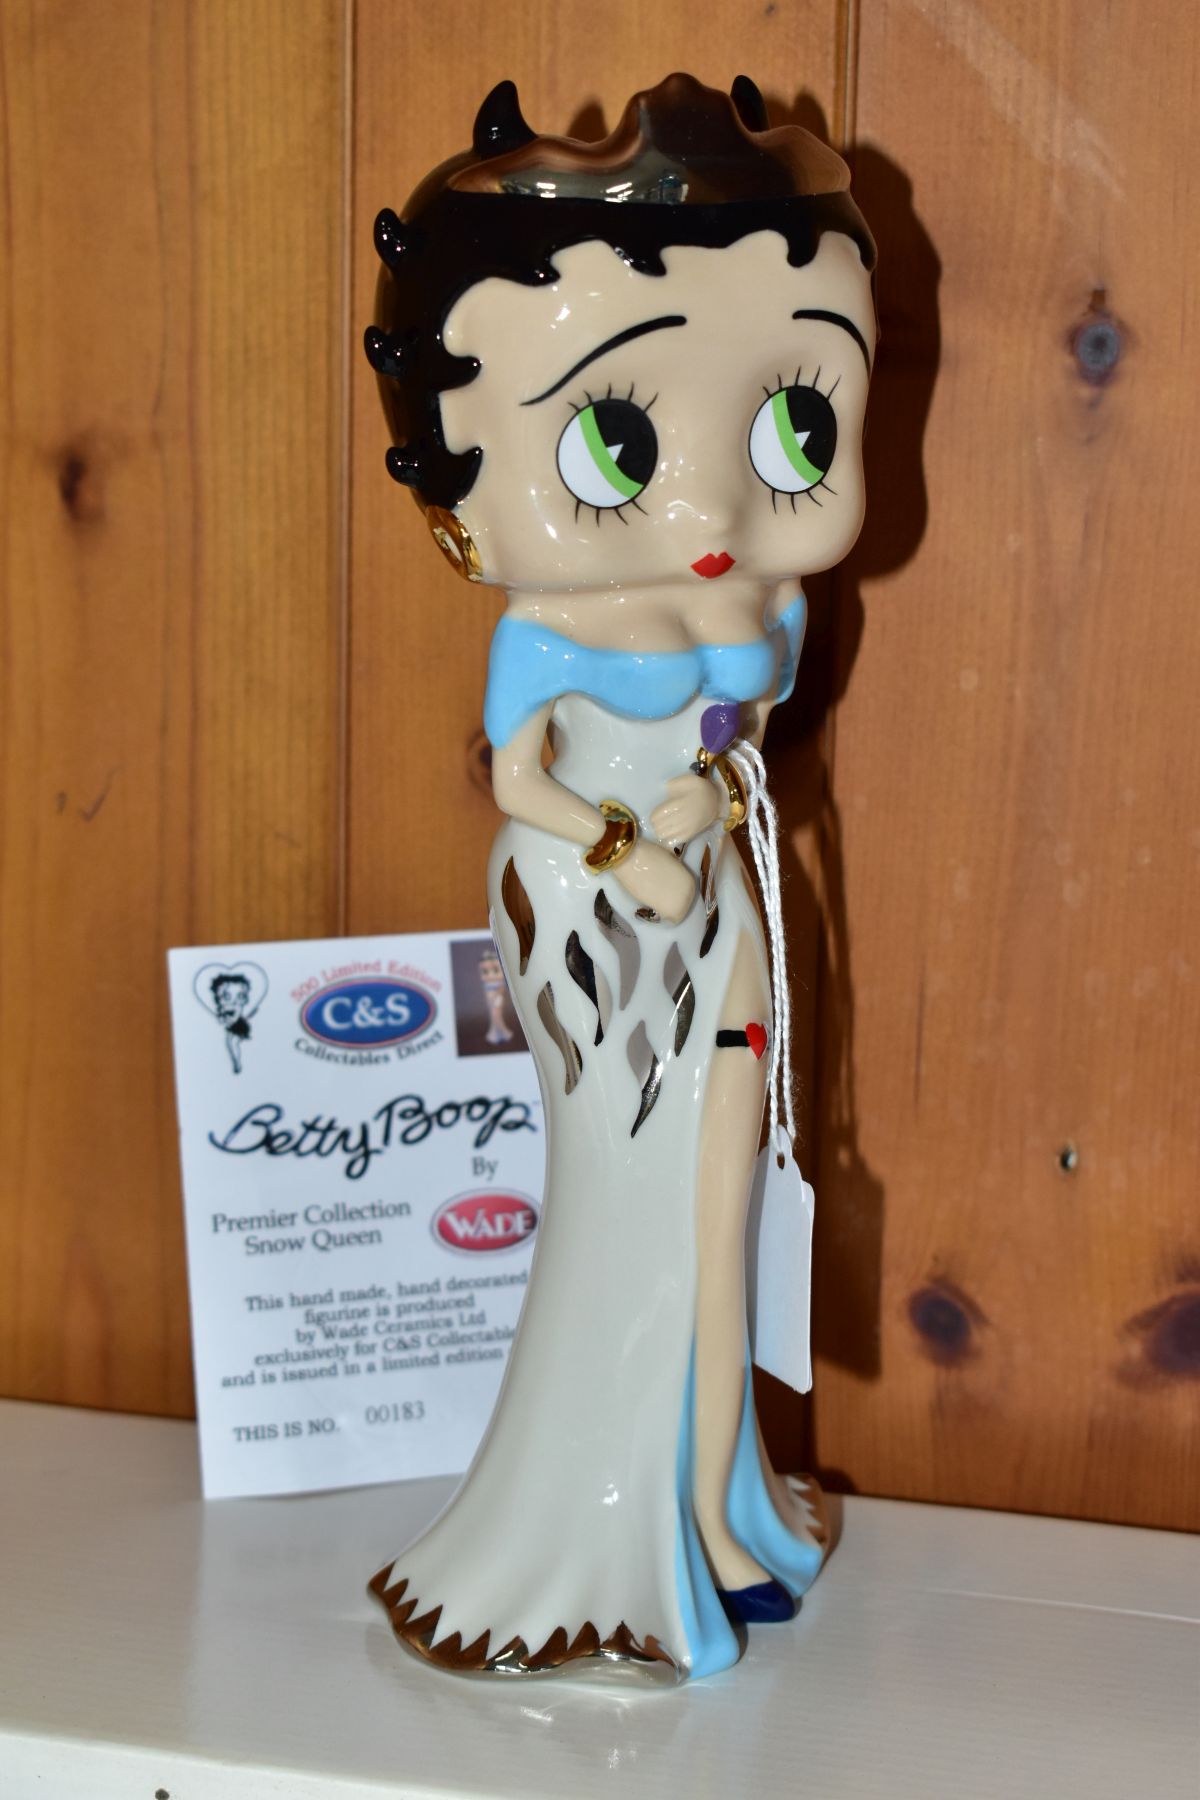 A BOXED LIMITED EDITION WADE C & S COLLECTABLES BETTY BOOP FIGURE, Premier Collection Snow Queen - Image 2 of 4